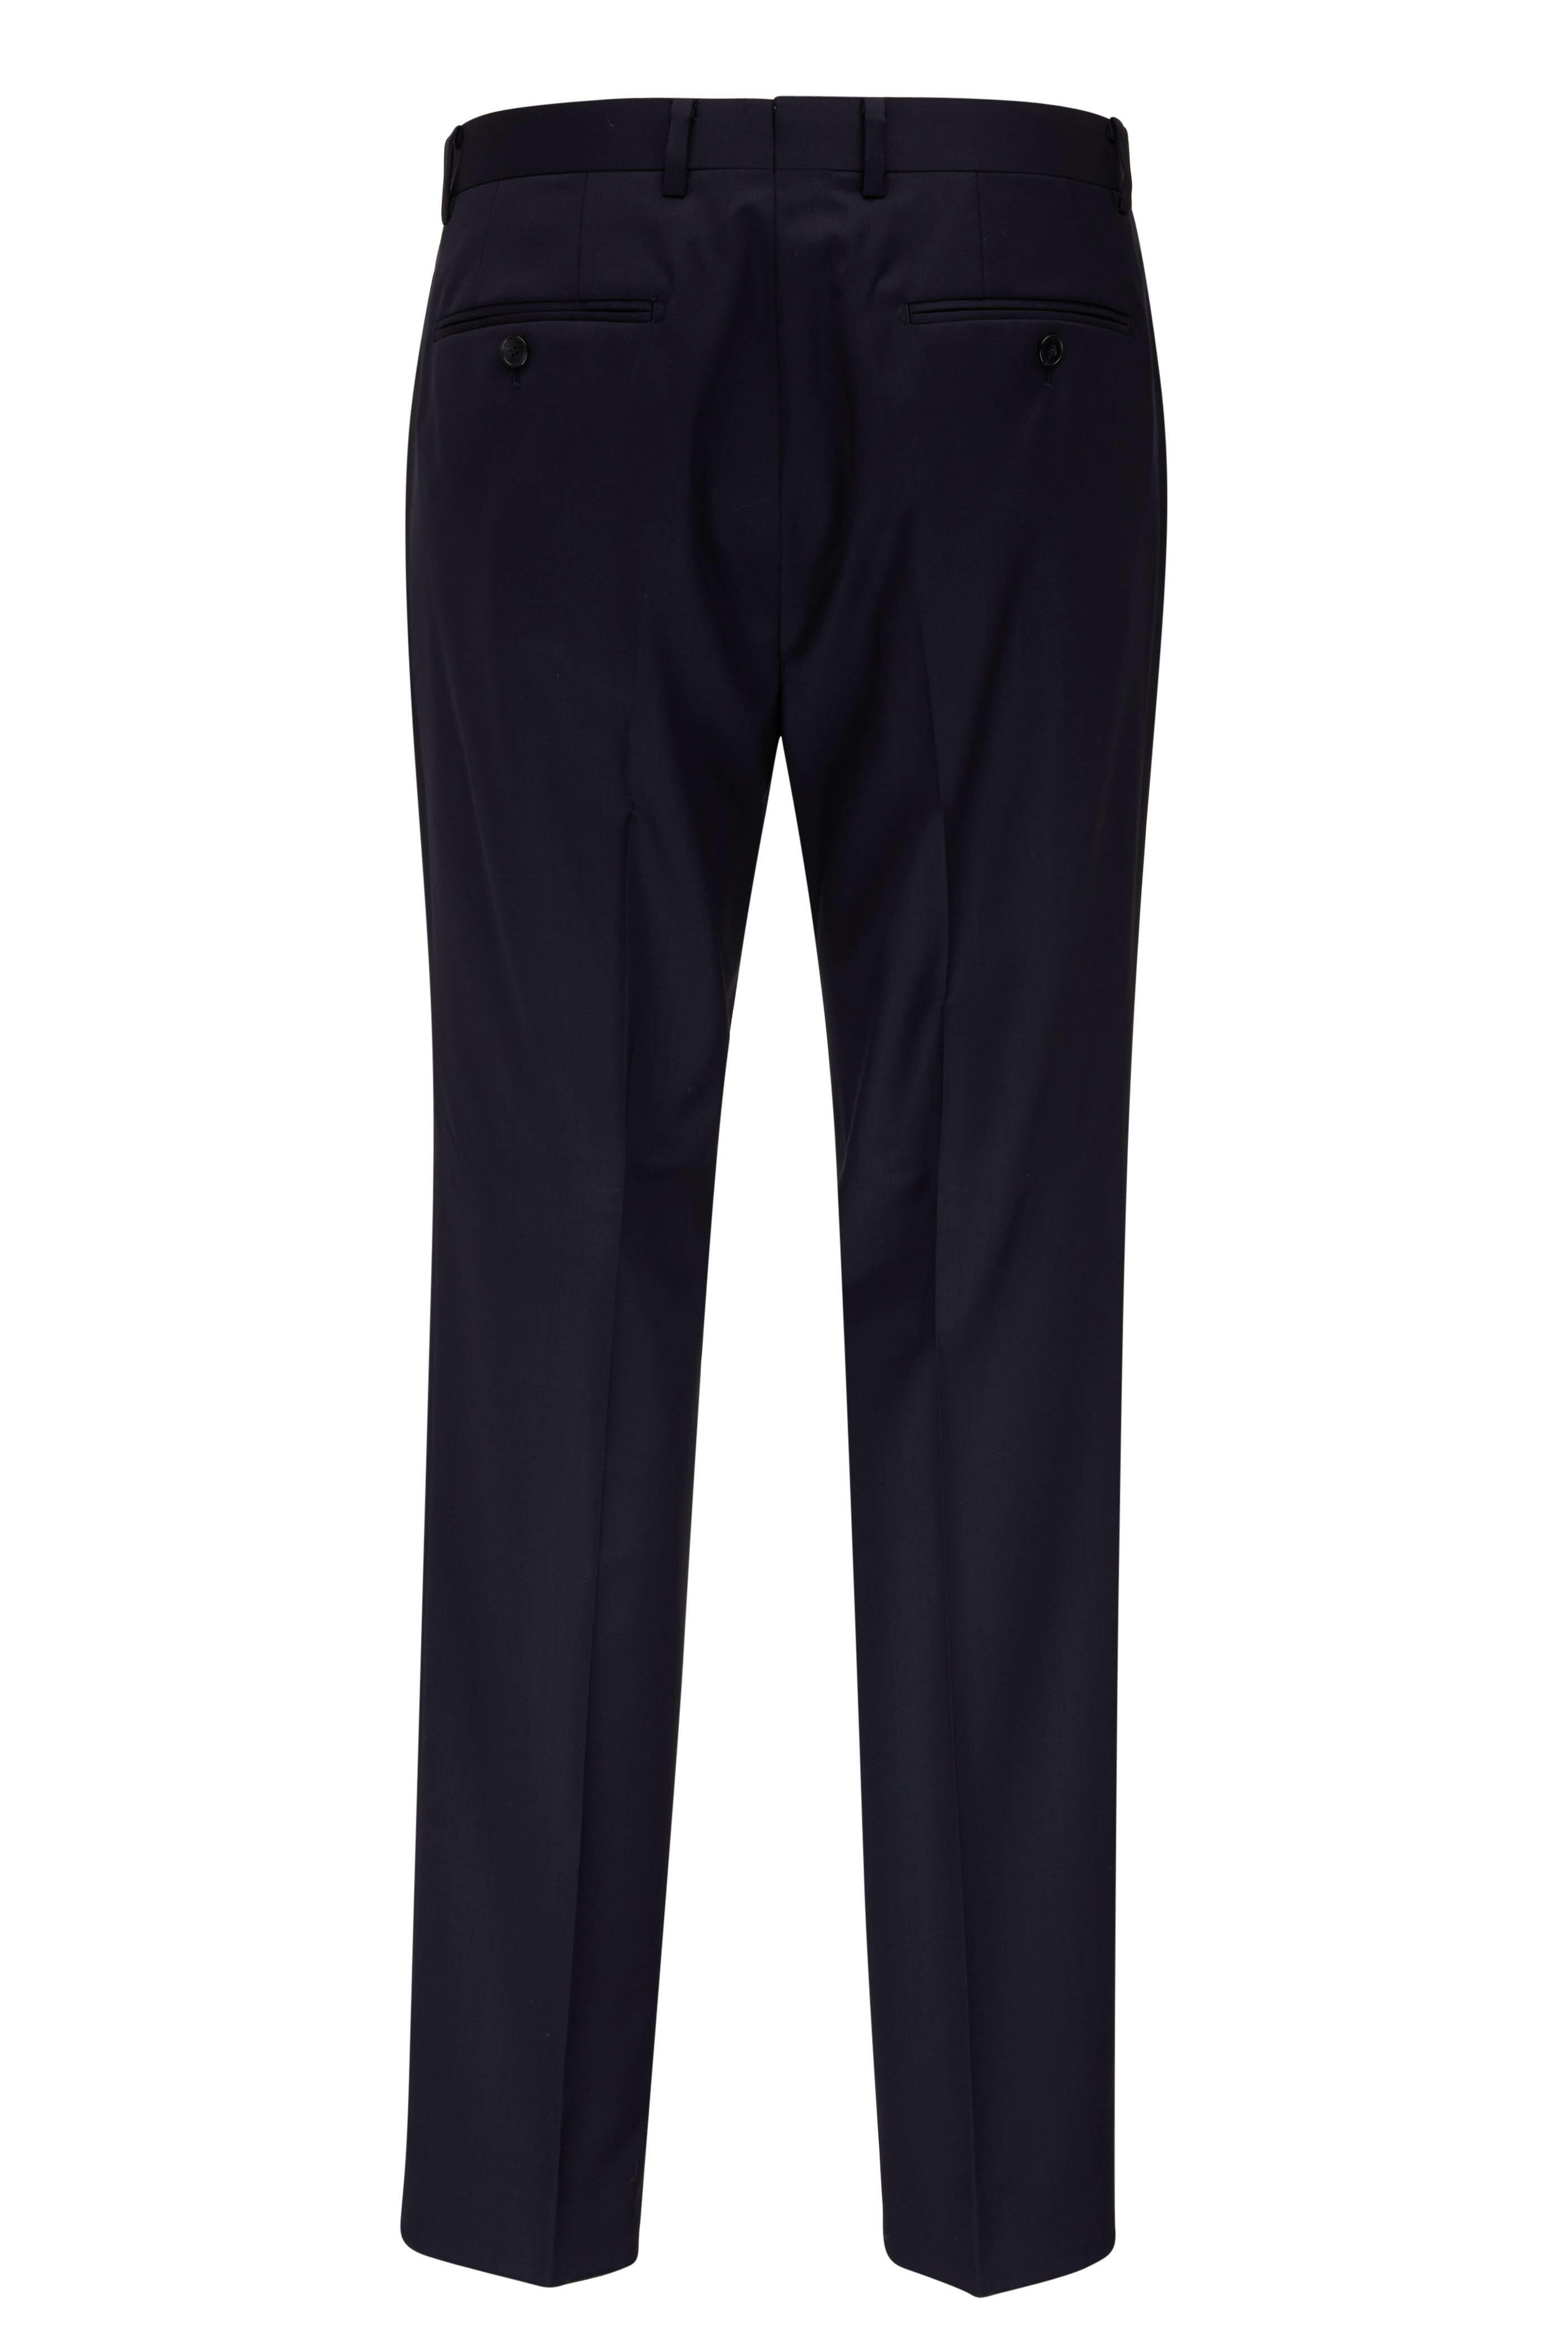 Atelier Munro - Solid Navy Stretch Wool Suit | Mitchell Stores